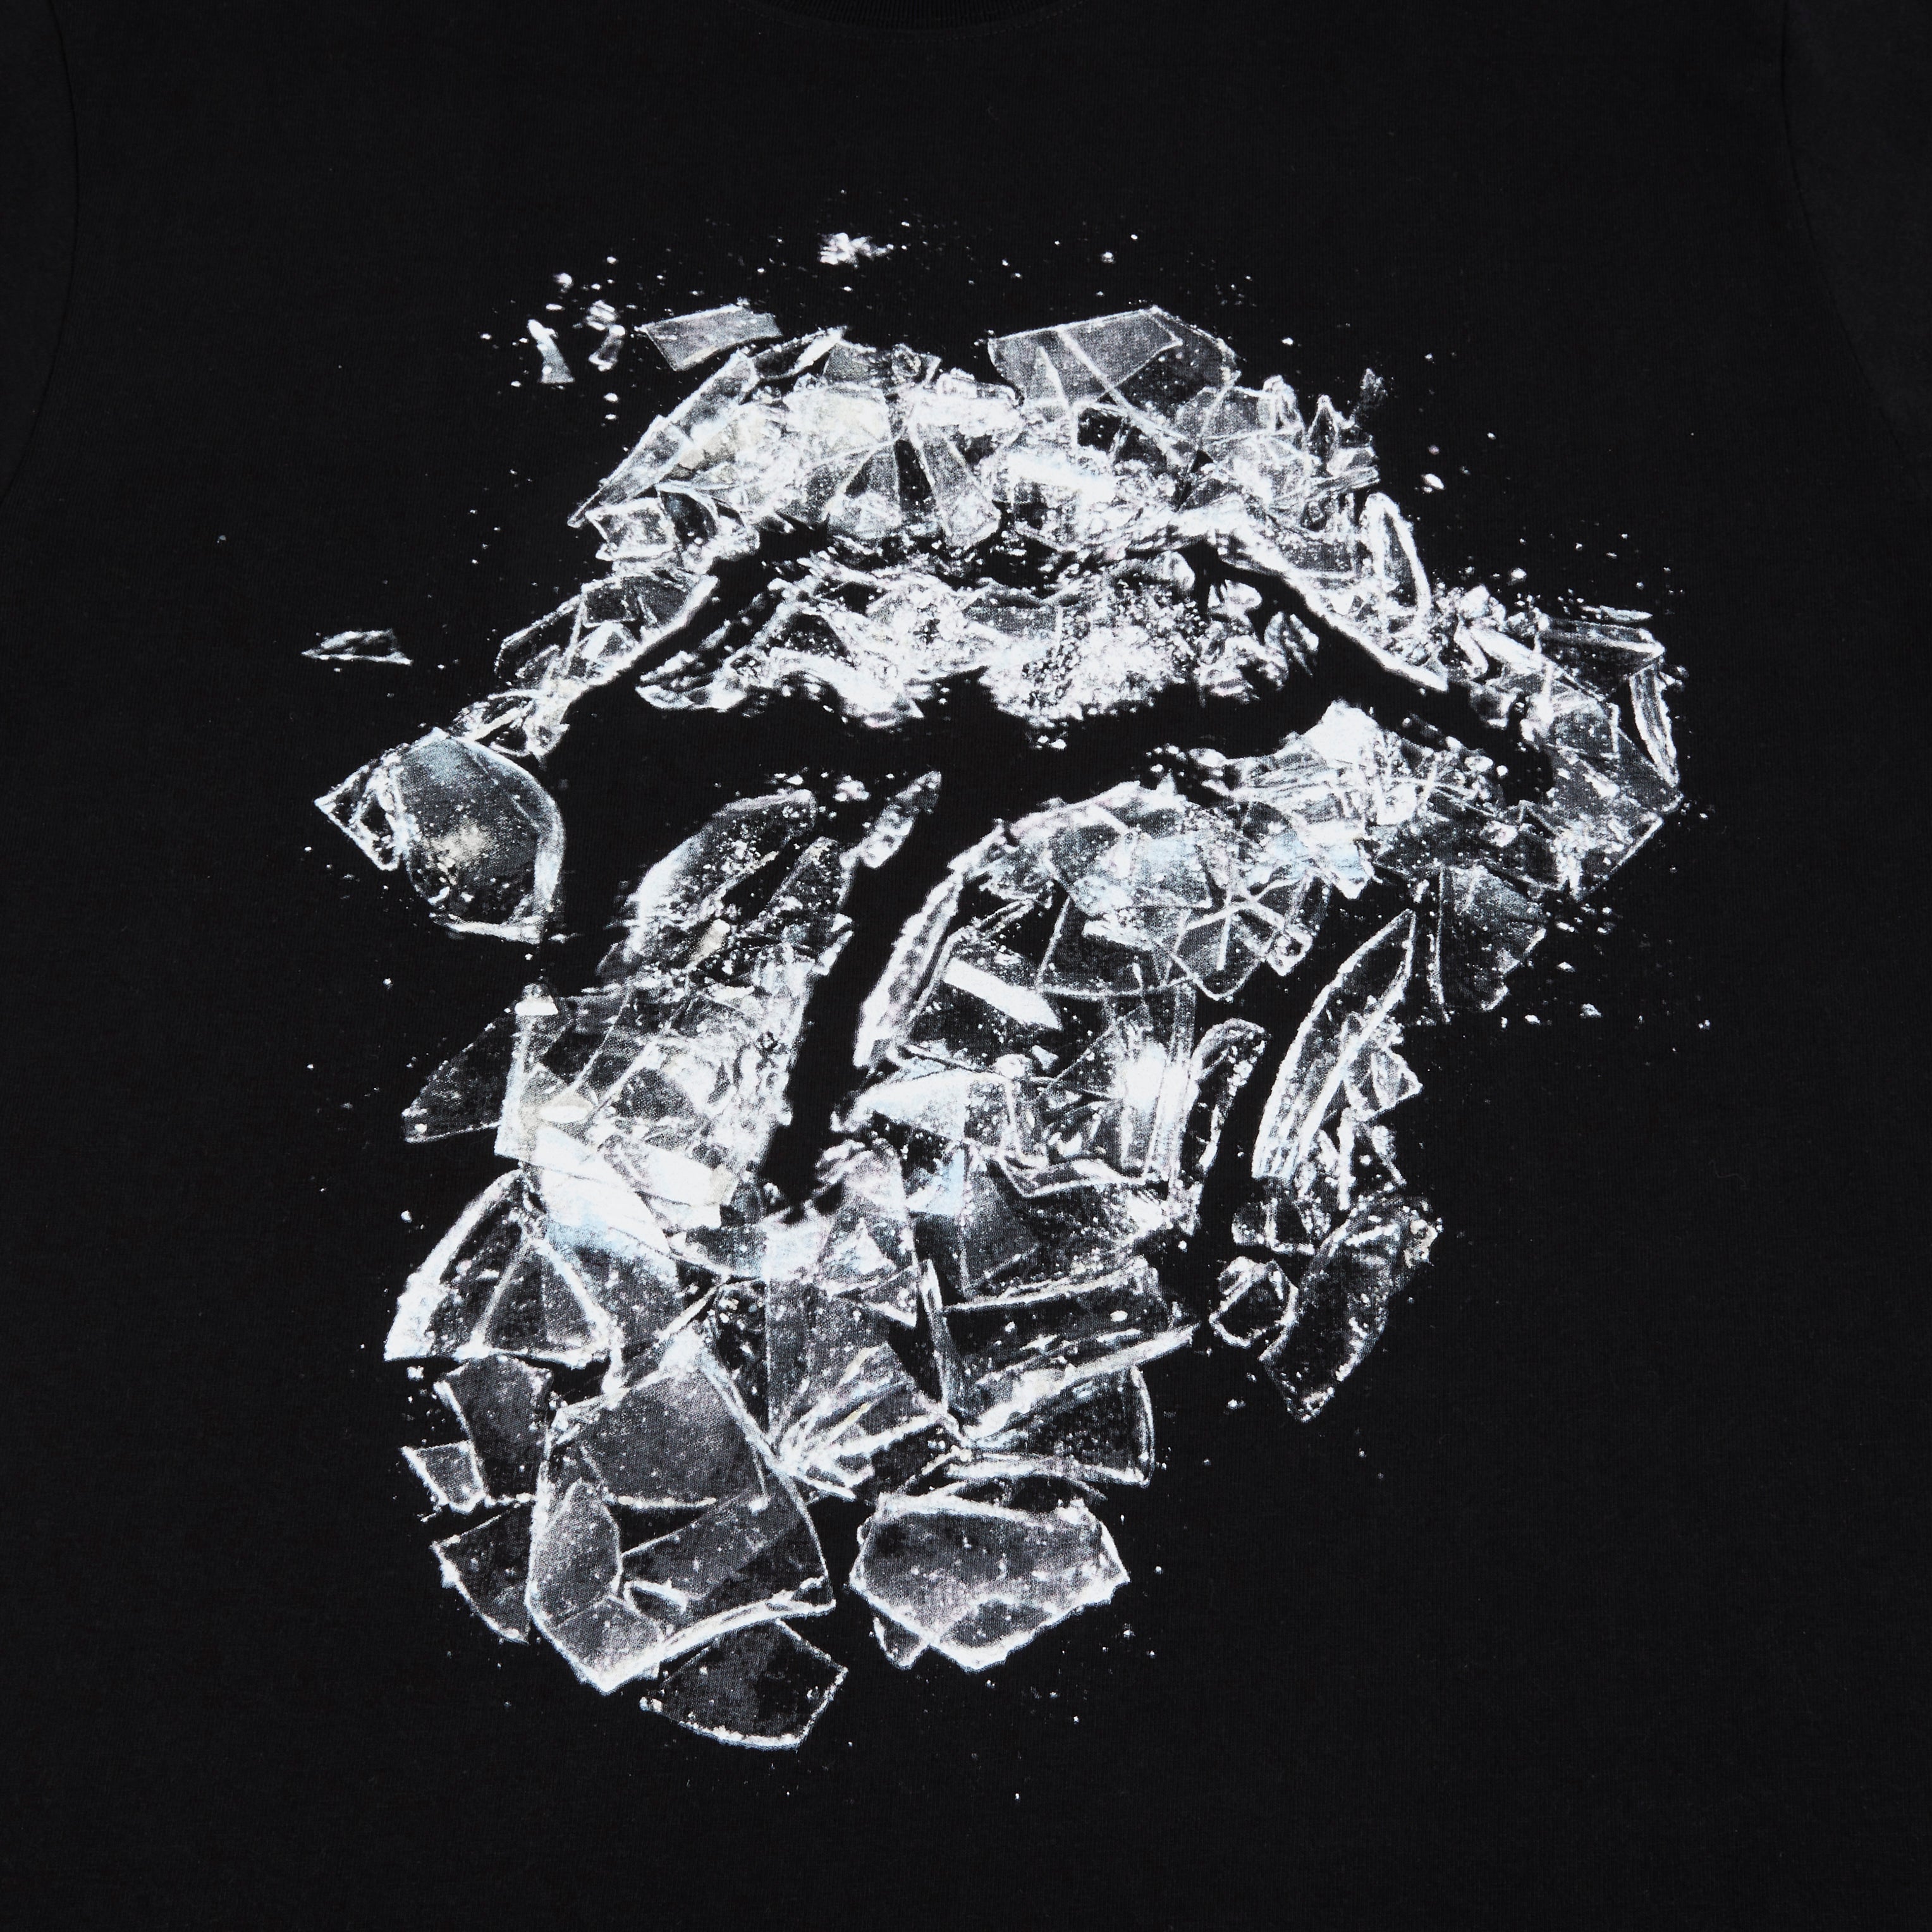 RS No. 9 Carnaby - RS No. 9 x KidSuper Real Shattered Glass Photo T-Shirt